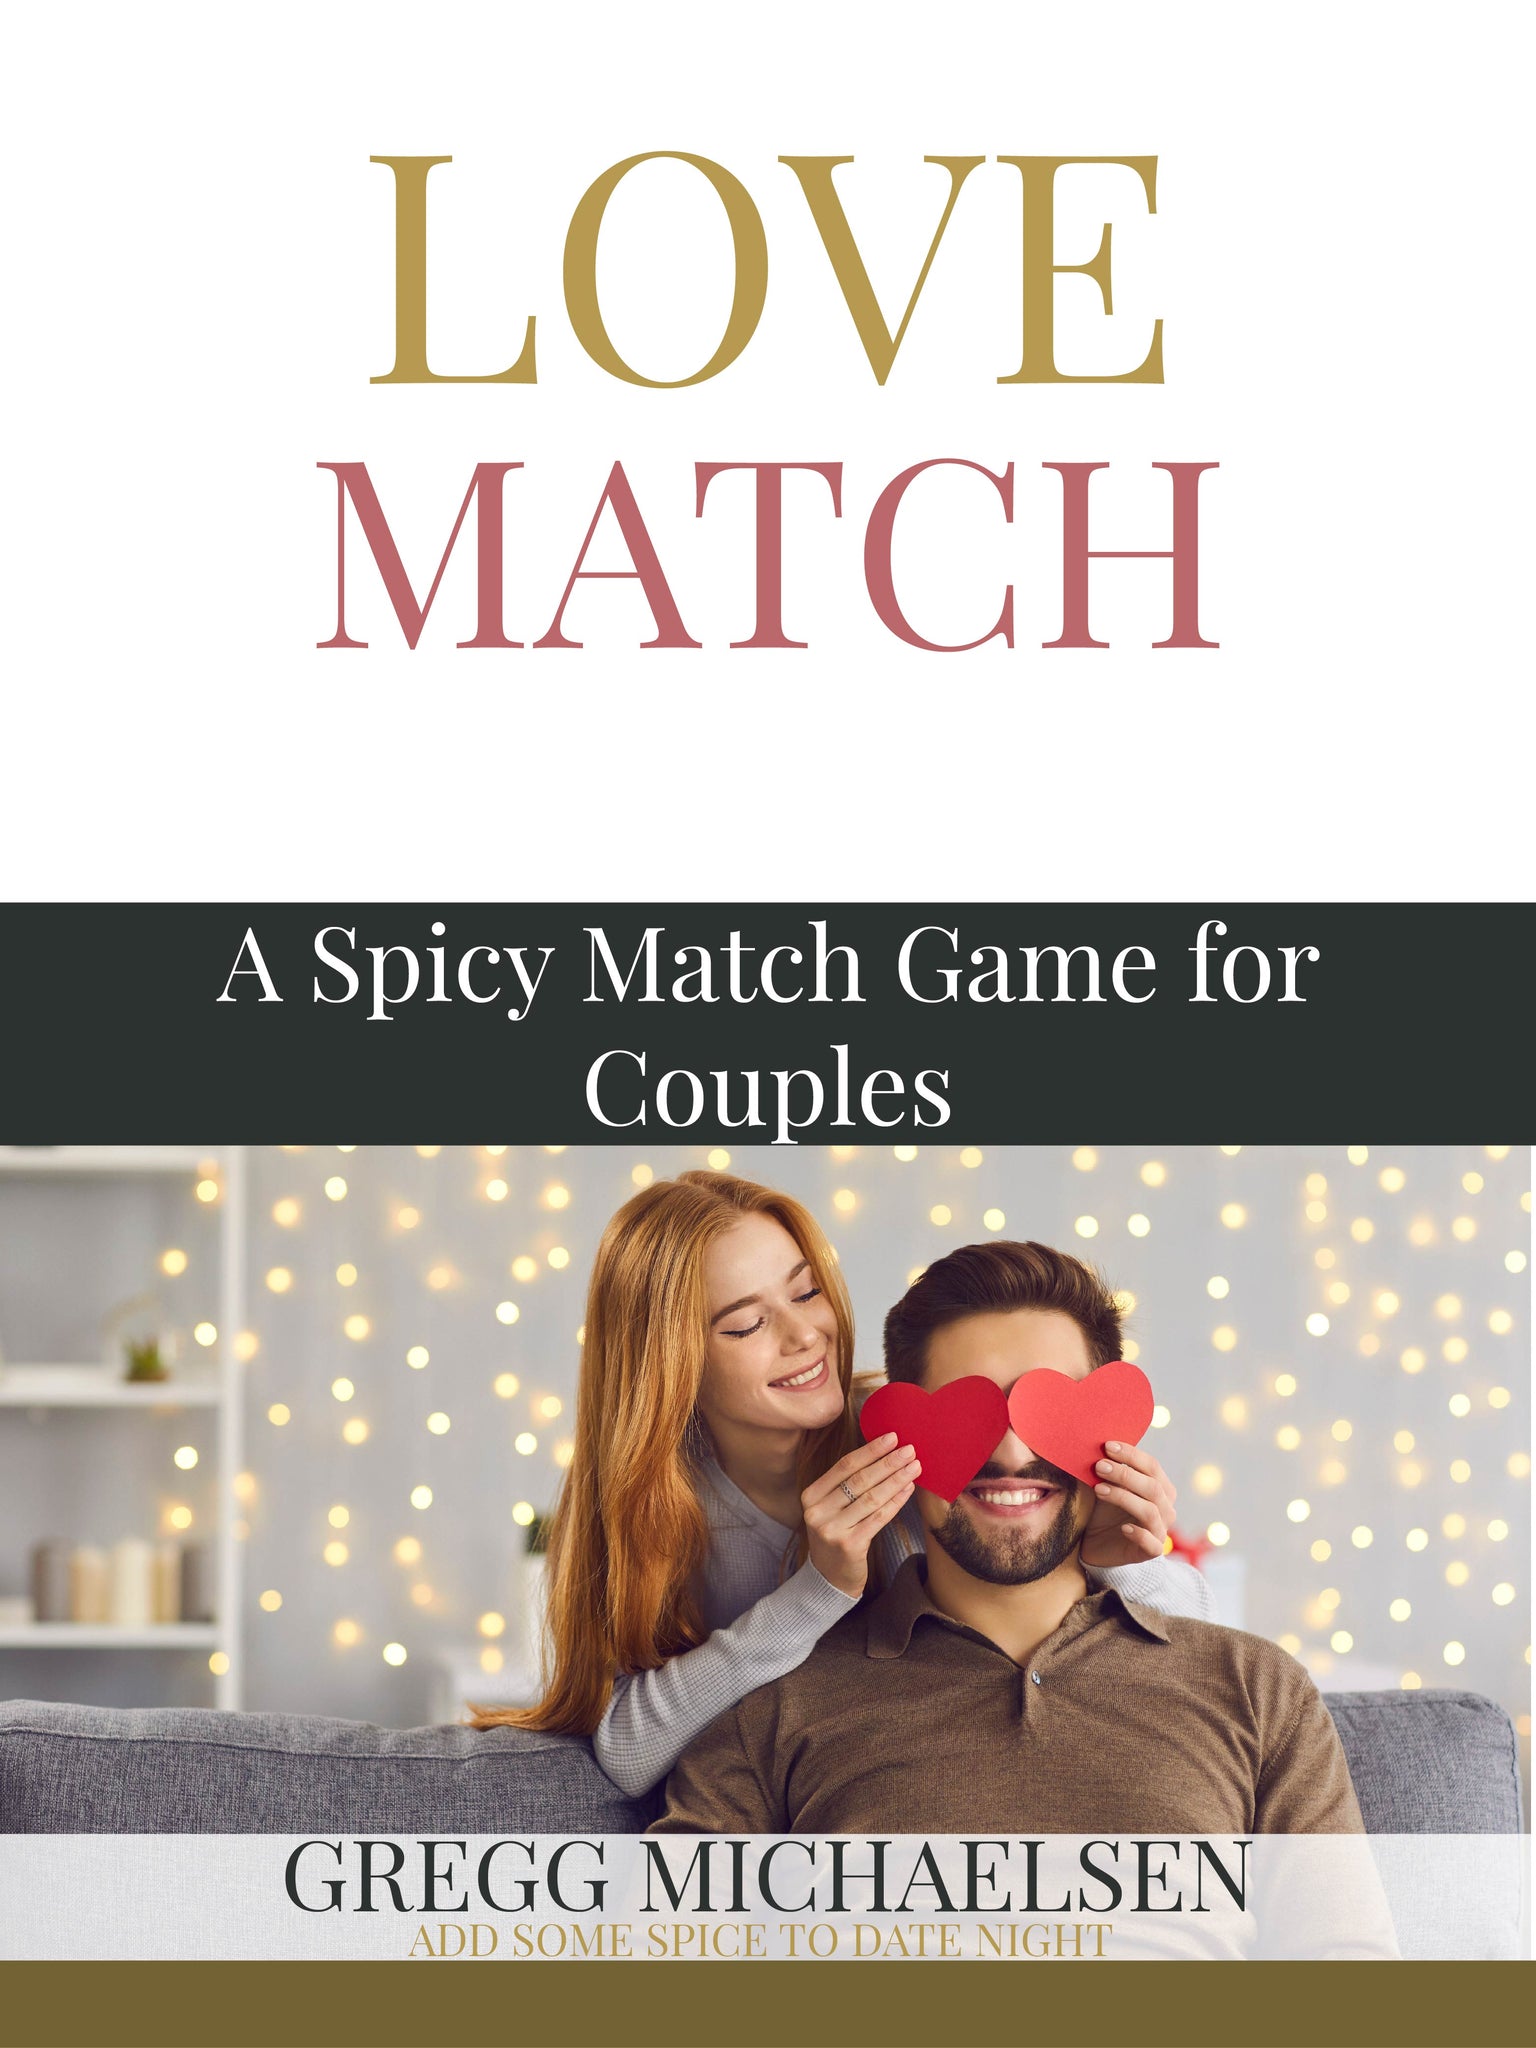 35 Fun and Spicy Date Night Games for Married Couples - The Happy Wallflower